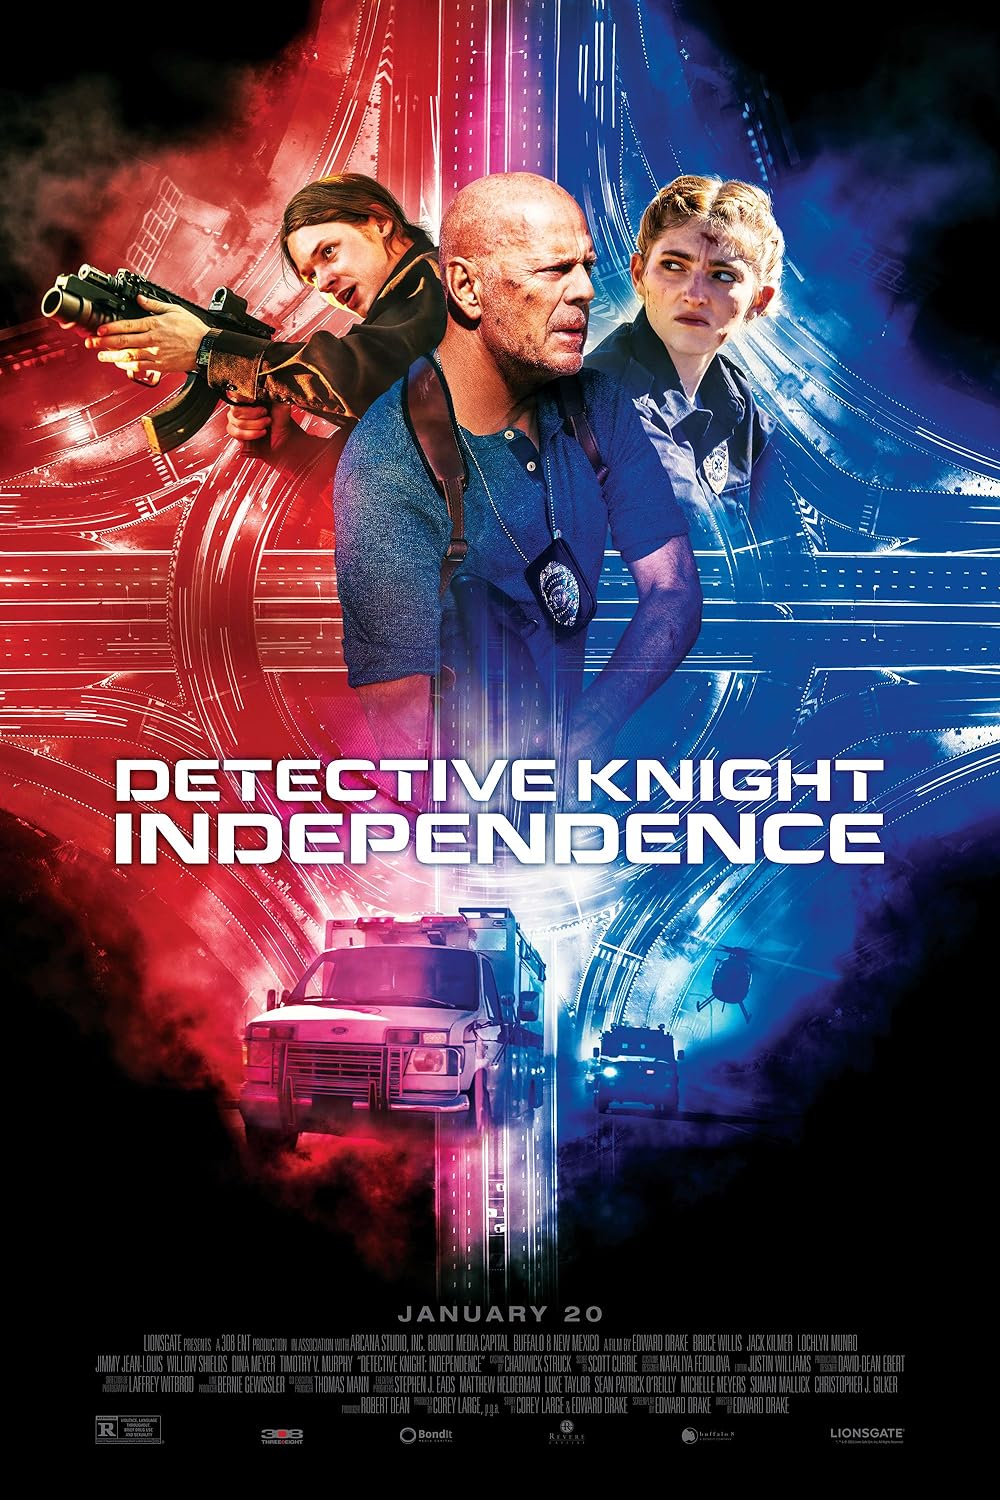 Detective Knight: Independence (December 15) - Streaming on Lionsgate Play